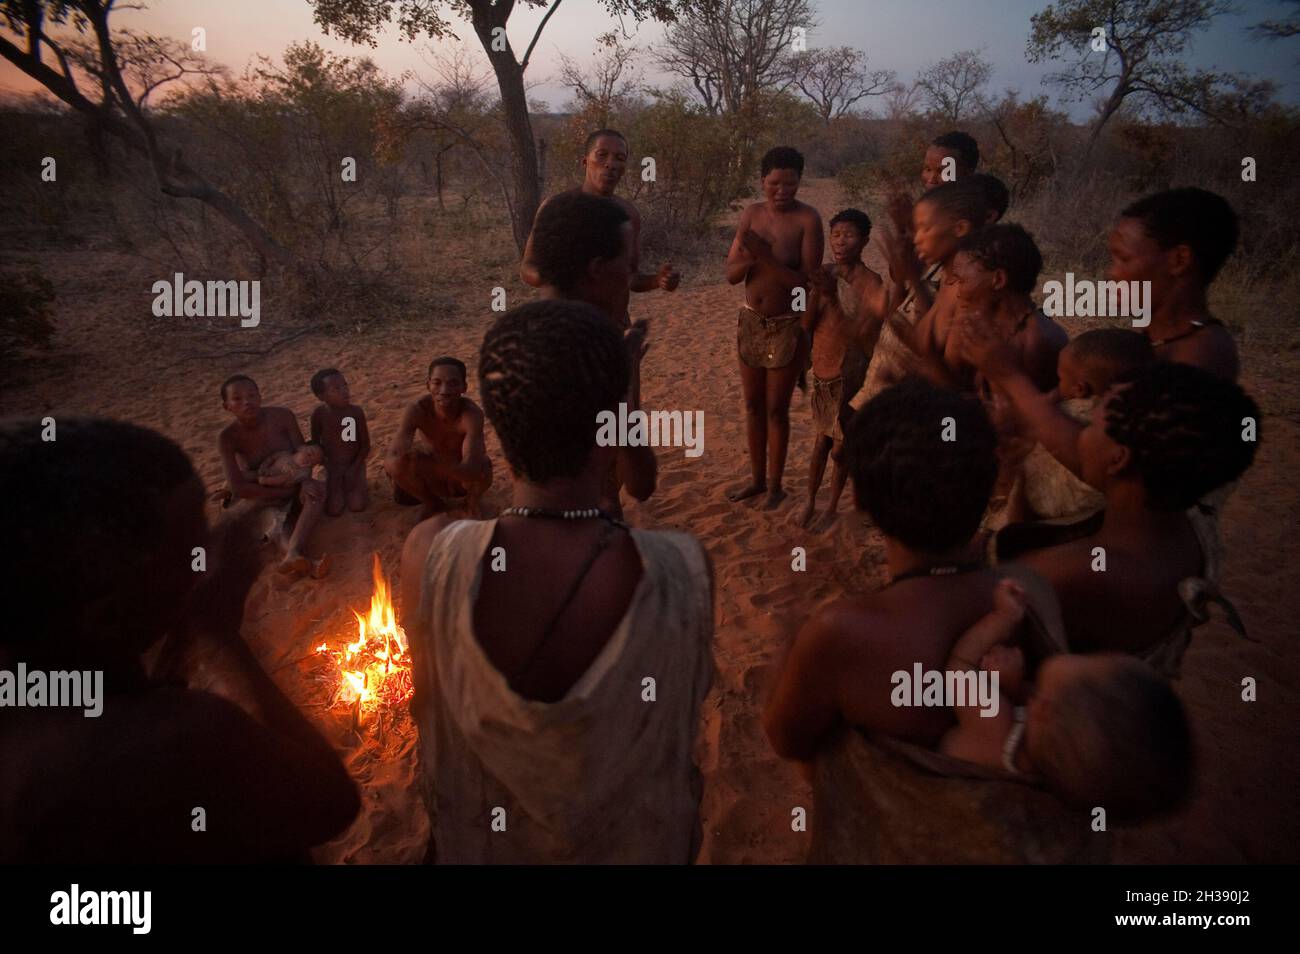 Bushman People Around The Campfire Performing A Traditional Dance At Dusk Grashoek Namibia